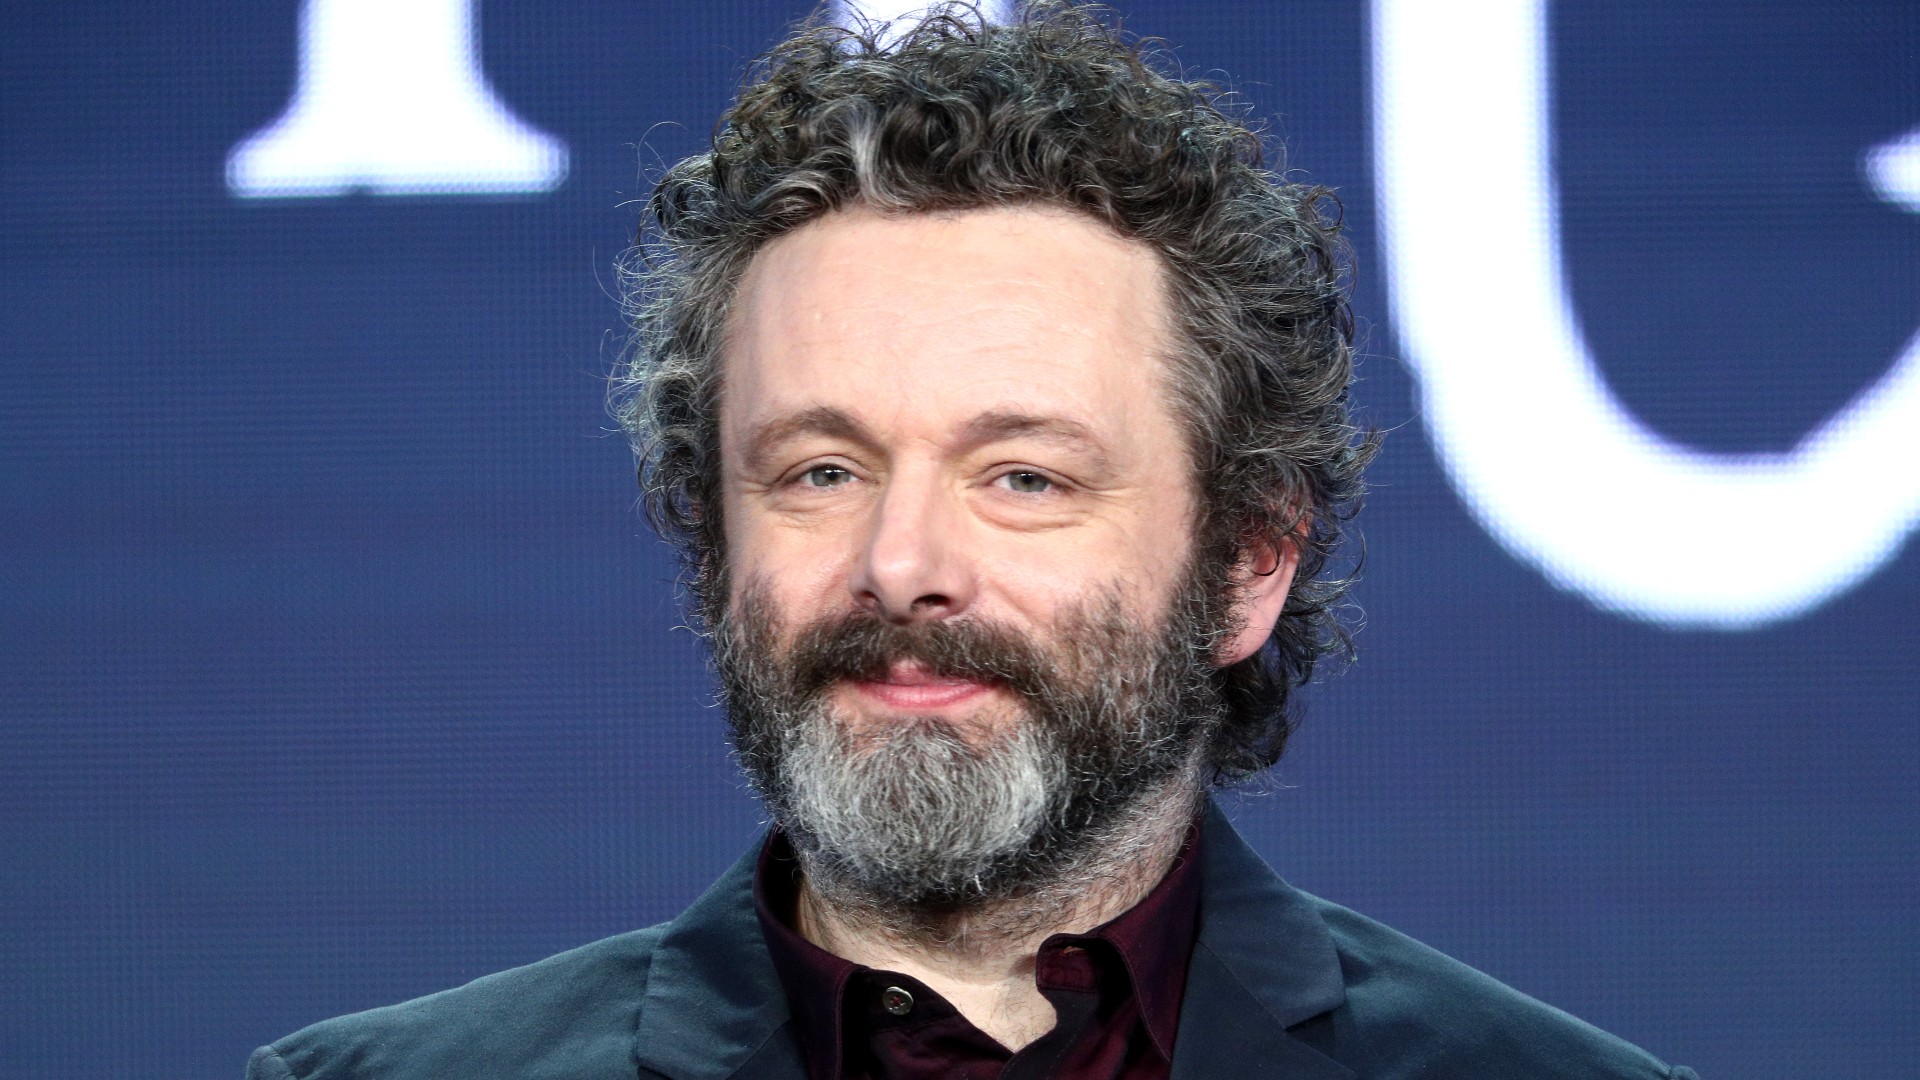 British Icon of the Week: Michael Sheen, the Welsh Actor Who's a Man of Principle